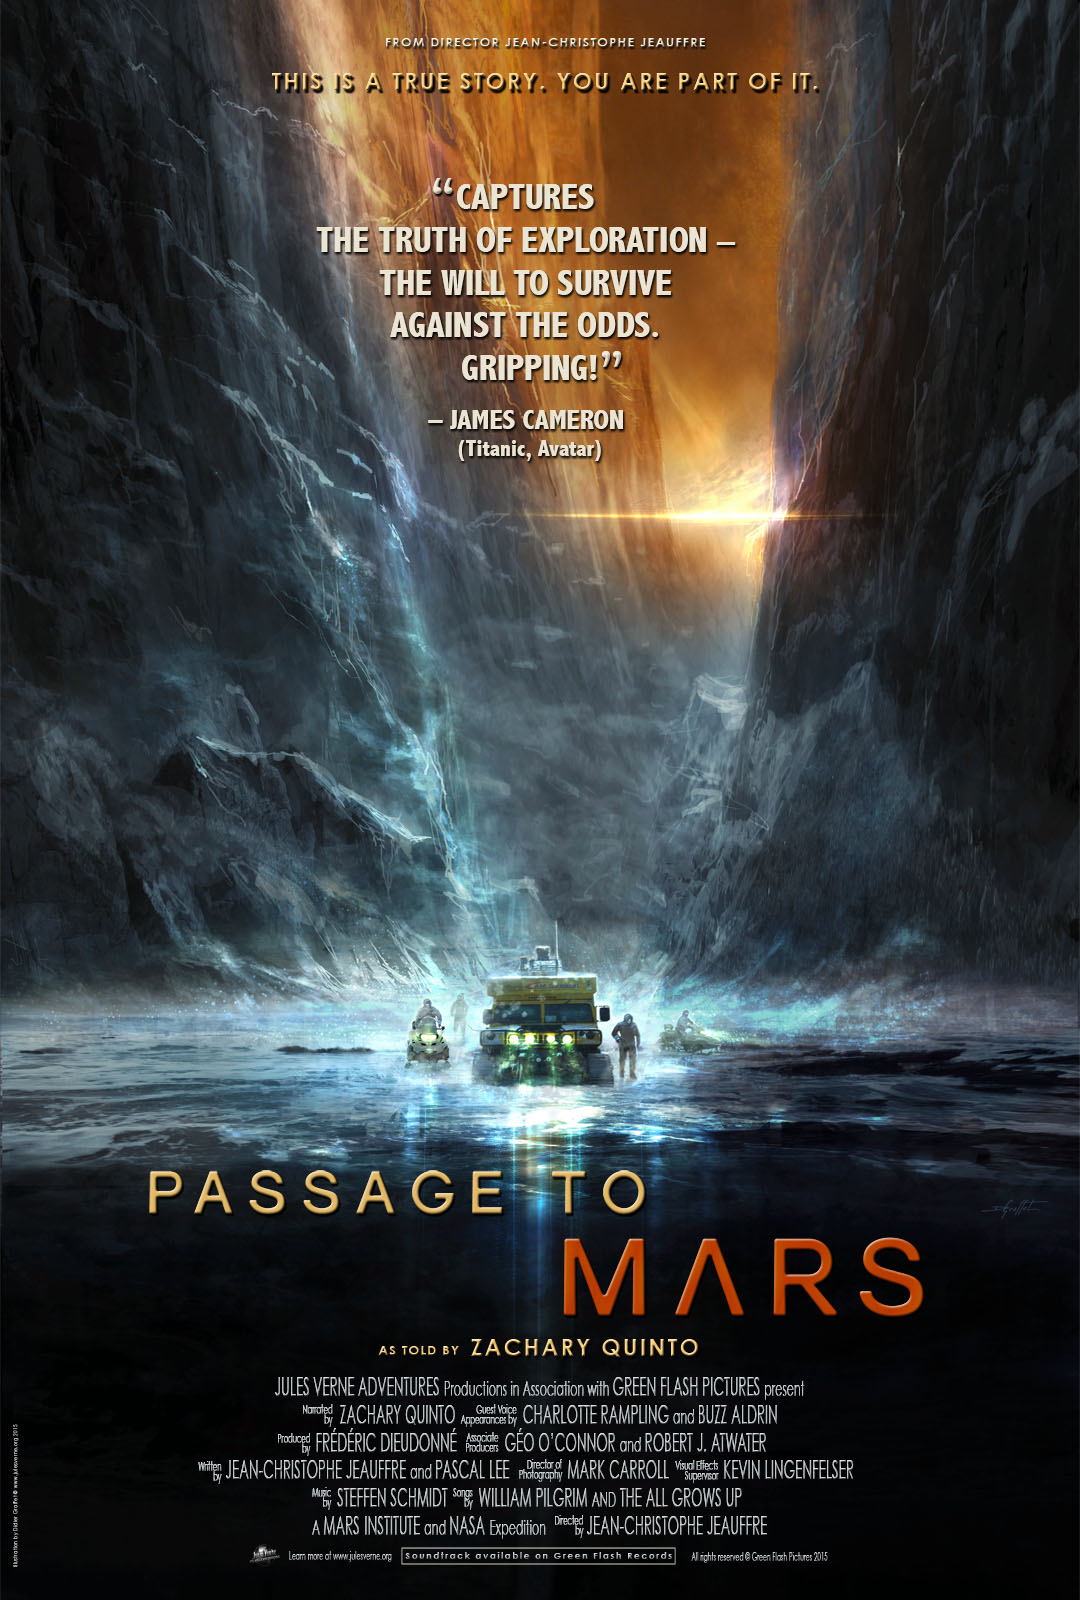 'Passage to Mars': New Film Follows Voyage to 'Mars on Earth'